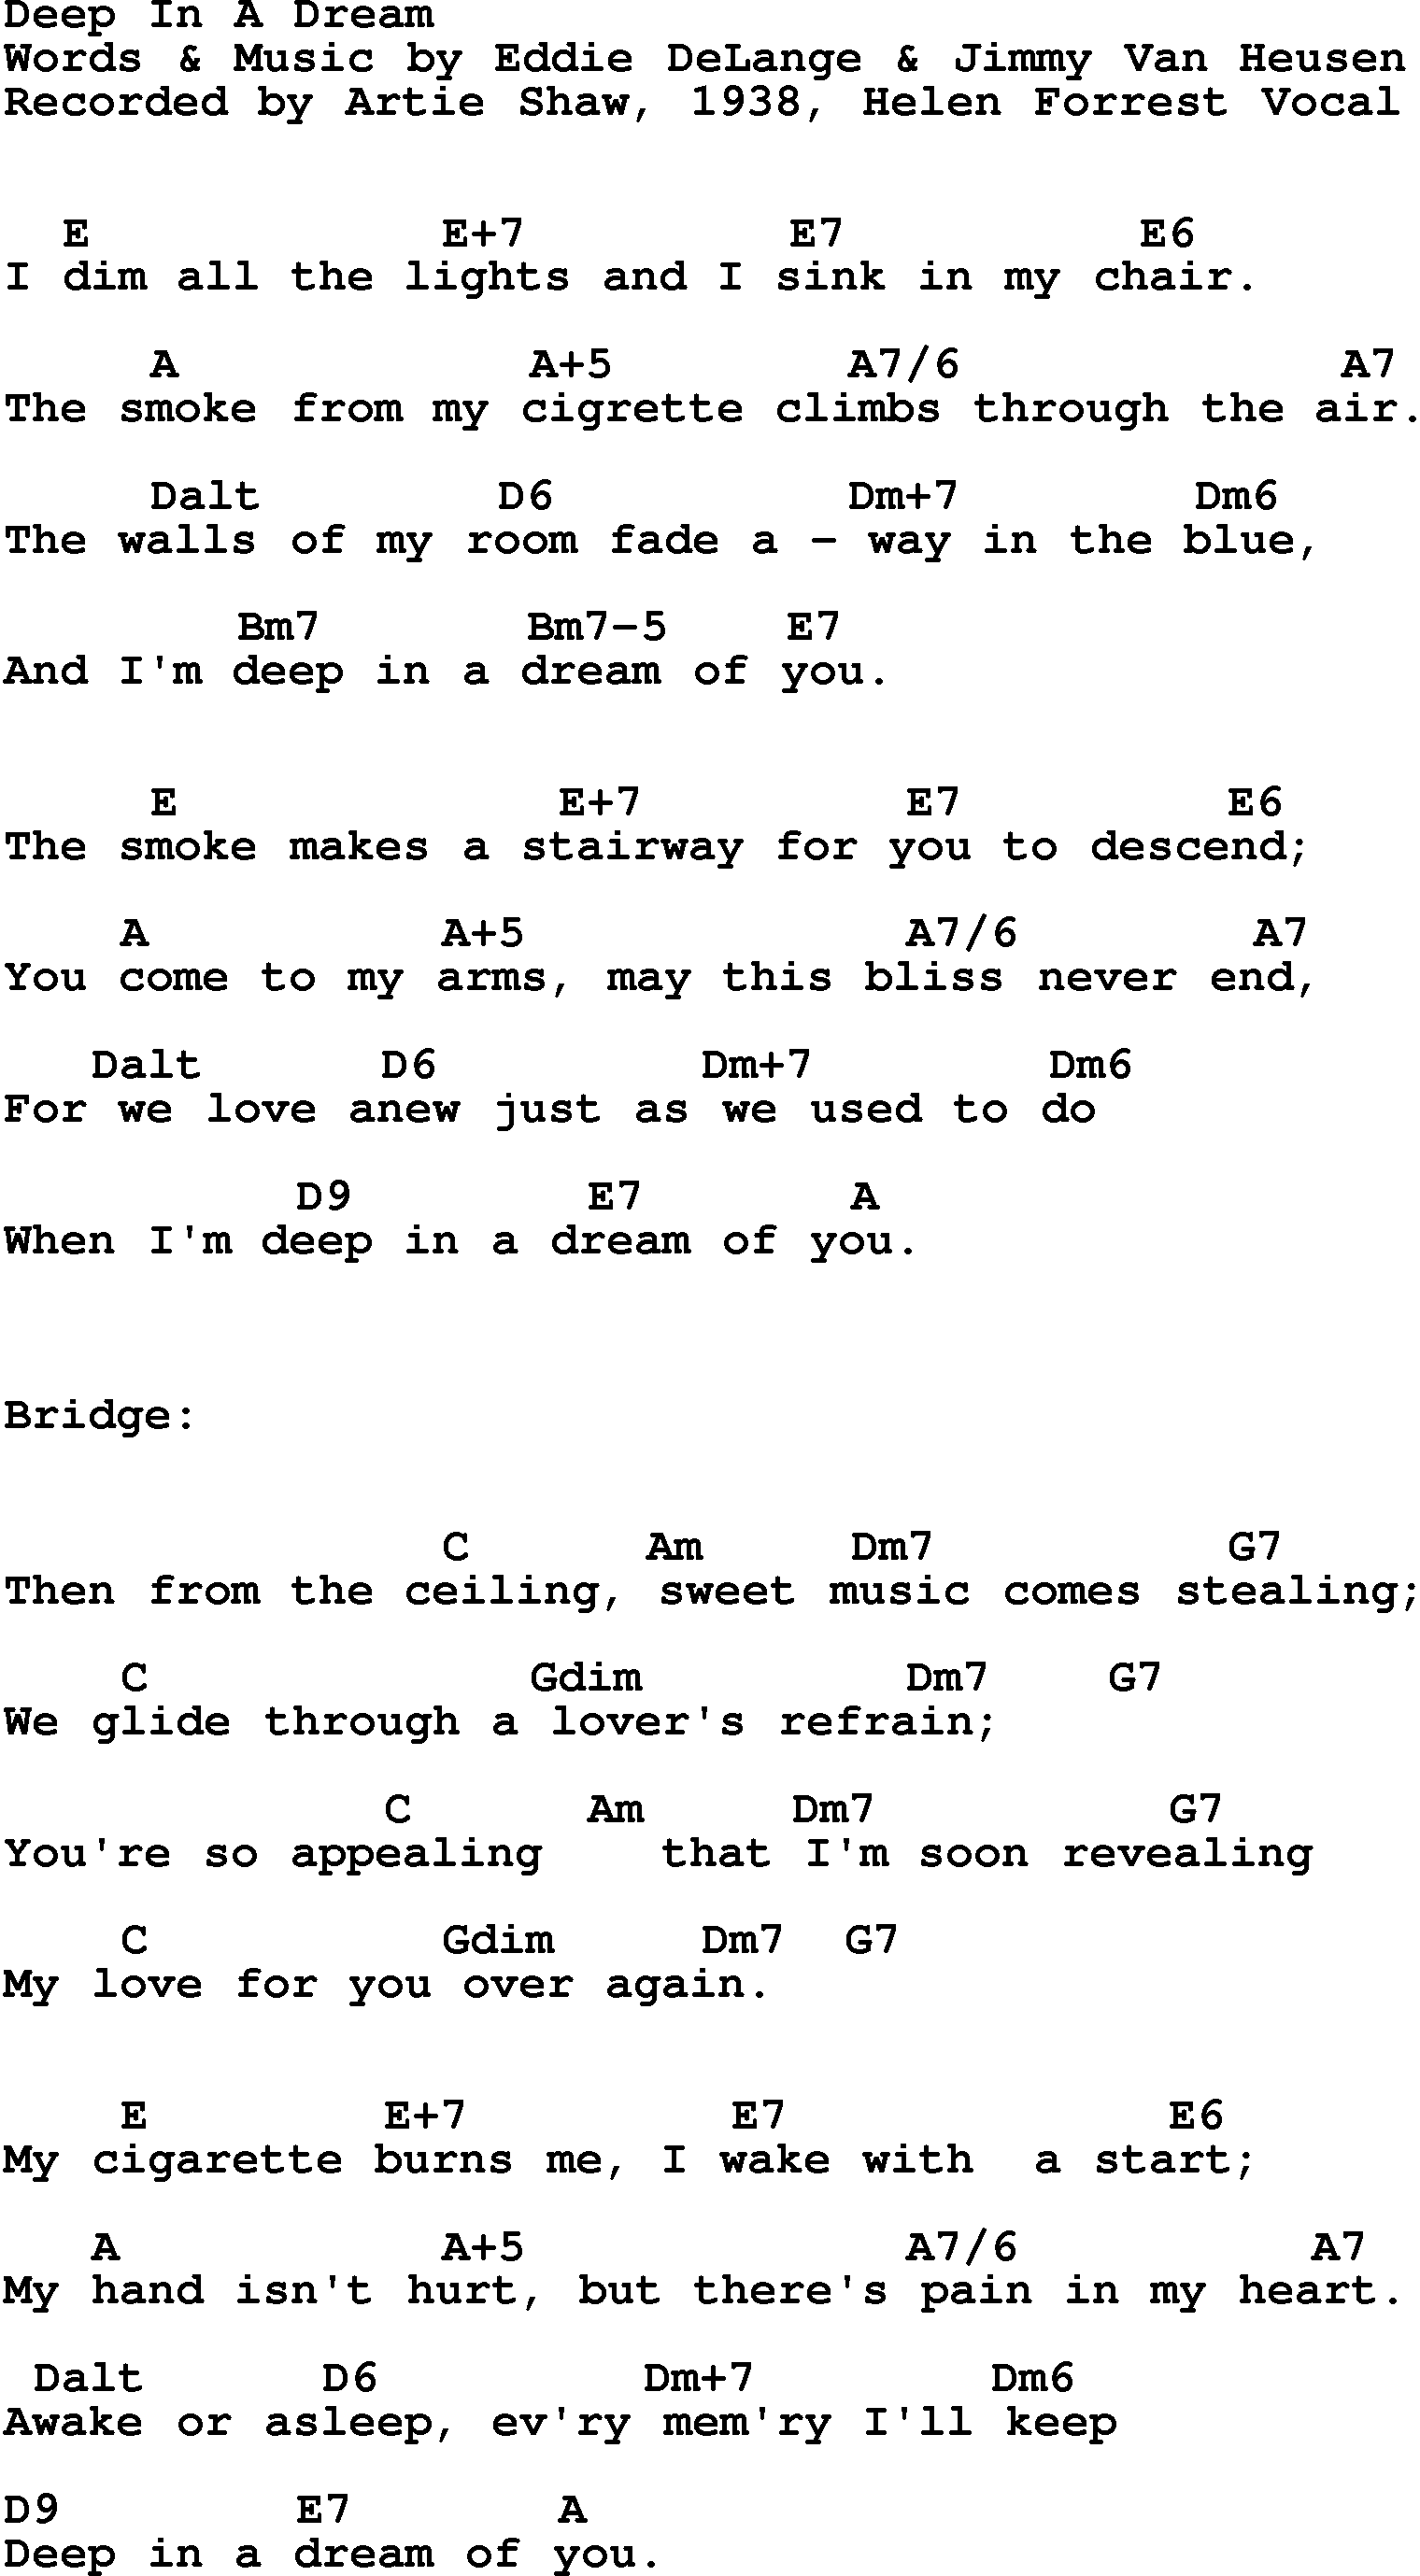 Song Lyrics with guitar chords for Deep In A Dream - Artie Shaw, 1938, Helen Forrest Vocal